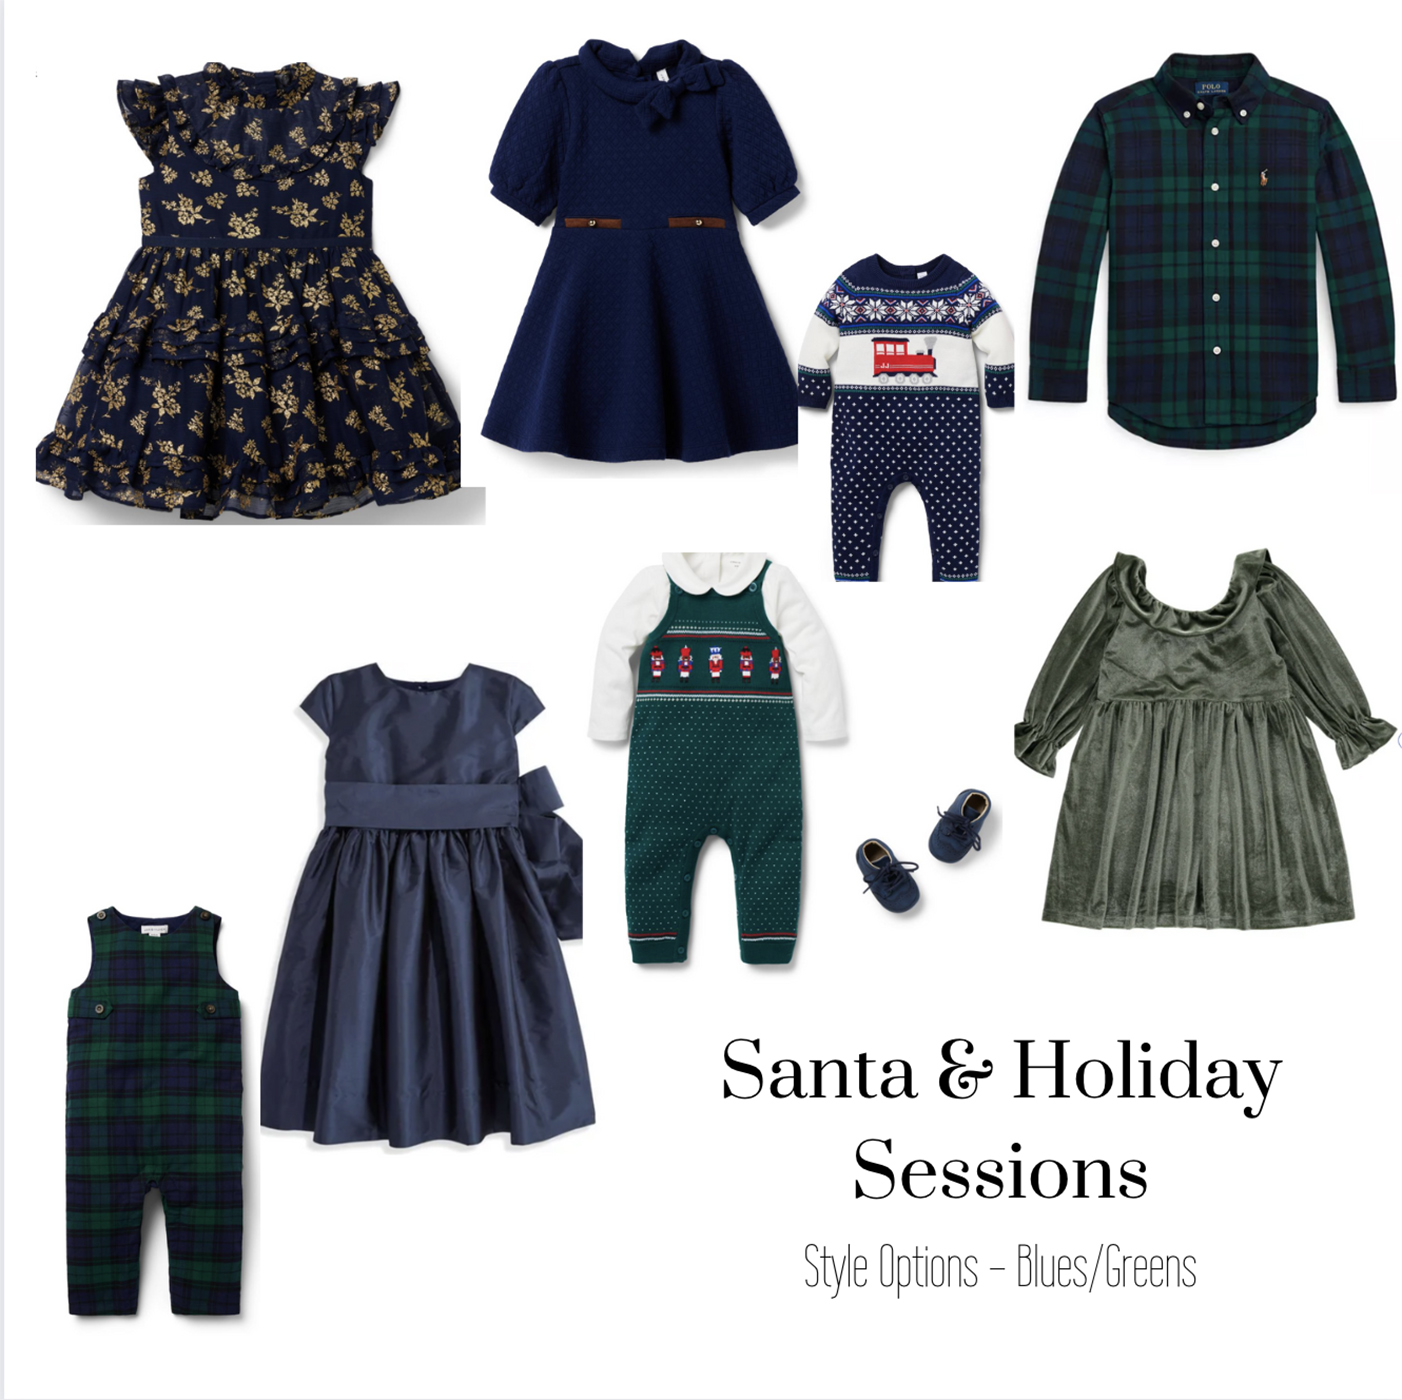 blue and green outfit options for santa sessions 